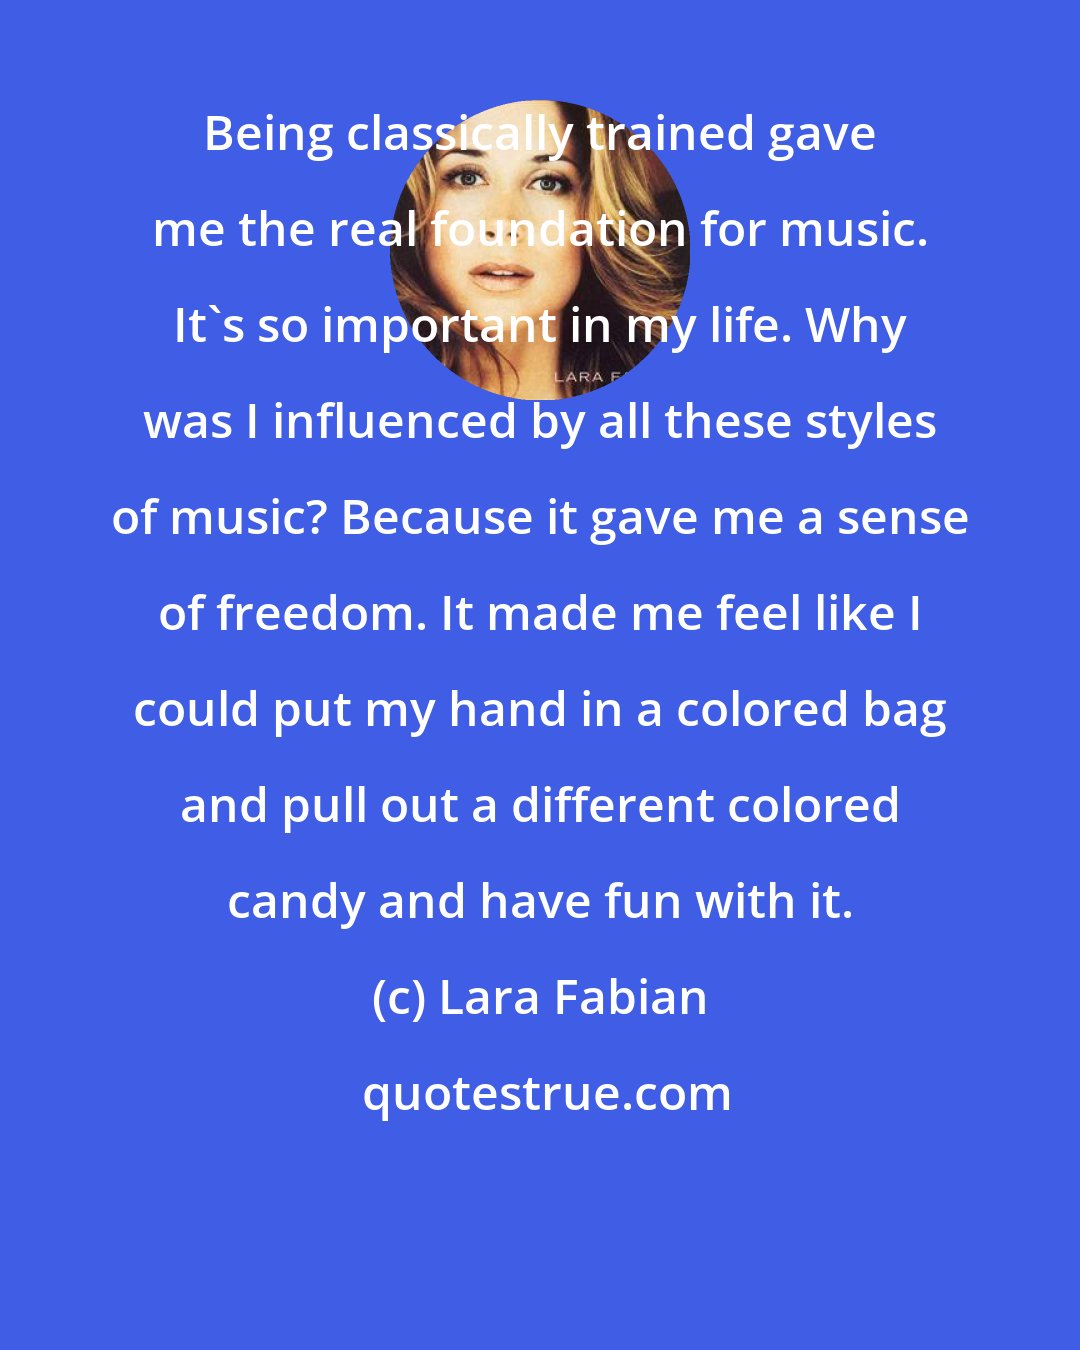 Lara Fabian: Being classically trained gave me the real foundation for music. It's so important in my life. Why was I influenced by all these styles of music? Because it gave me a sense of freedom. It made me feel like I could put my hand in a colored bag and pull out a different colored candy and have fun with it.